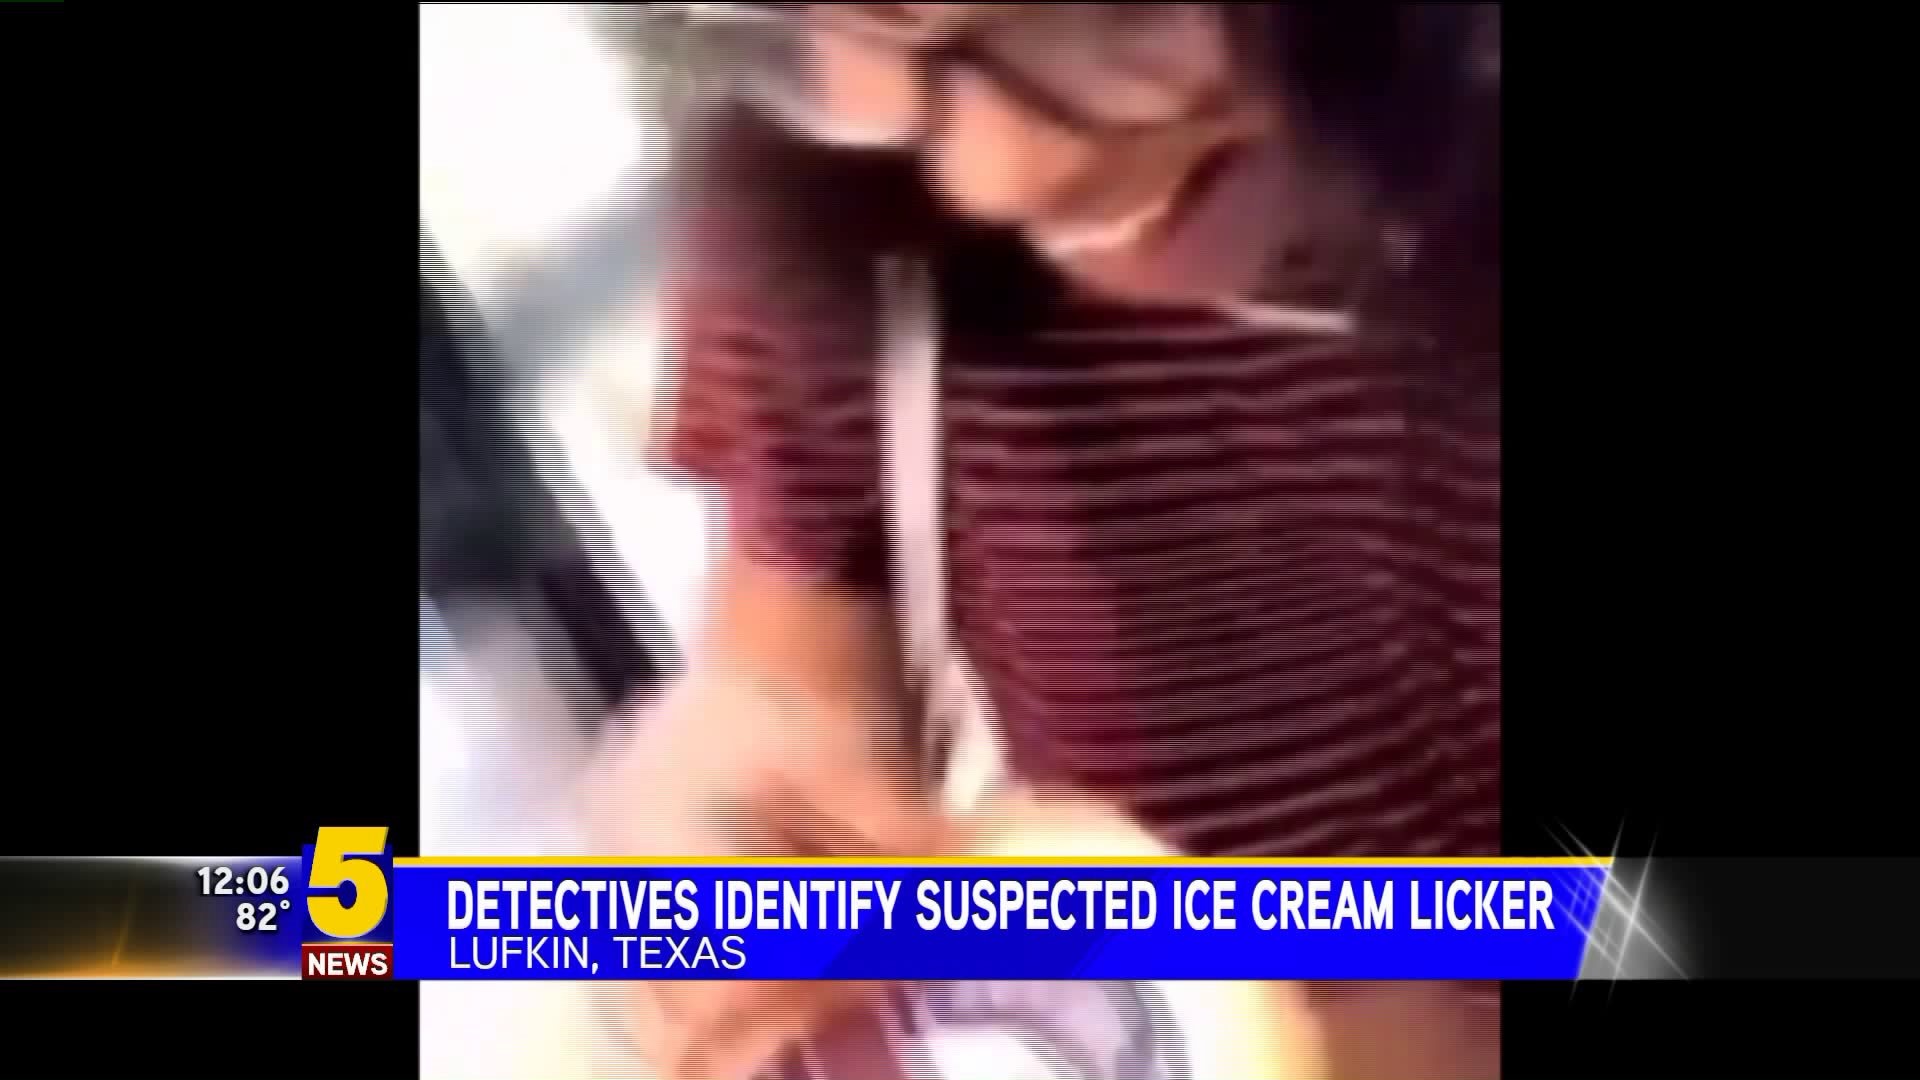 Detectives Identify Suspected Viral Ice Cream Licker In Texas